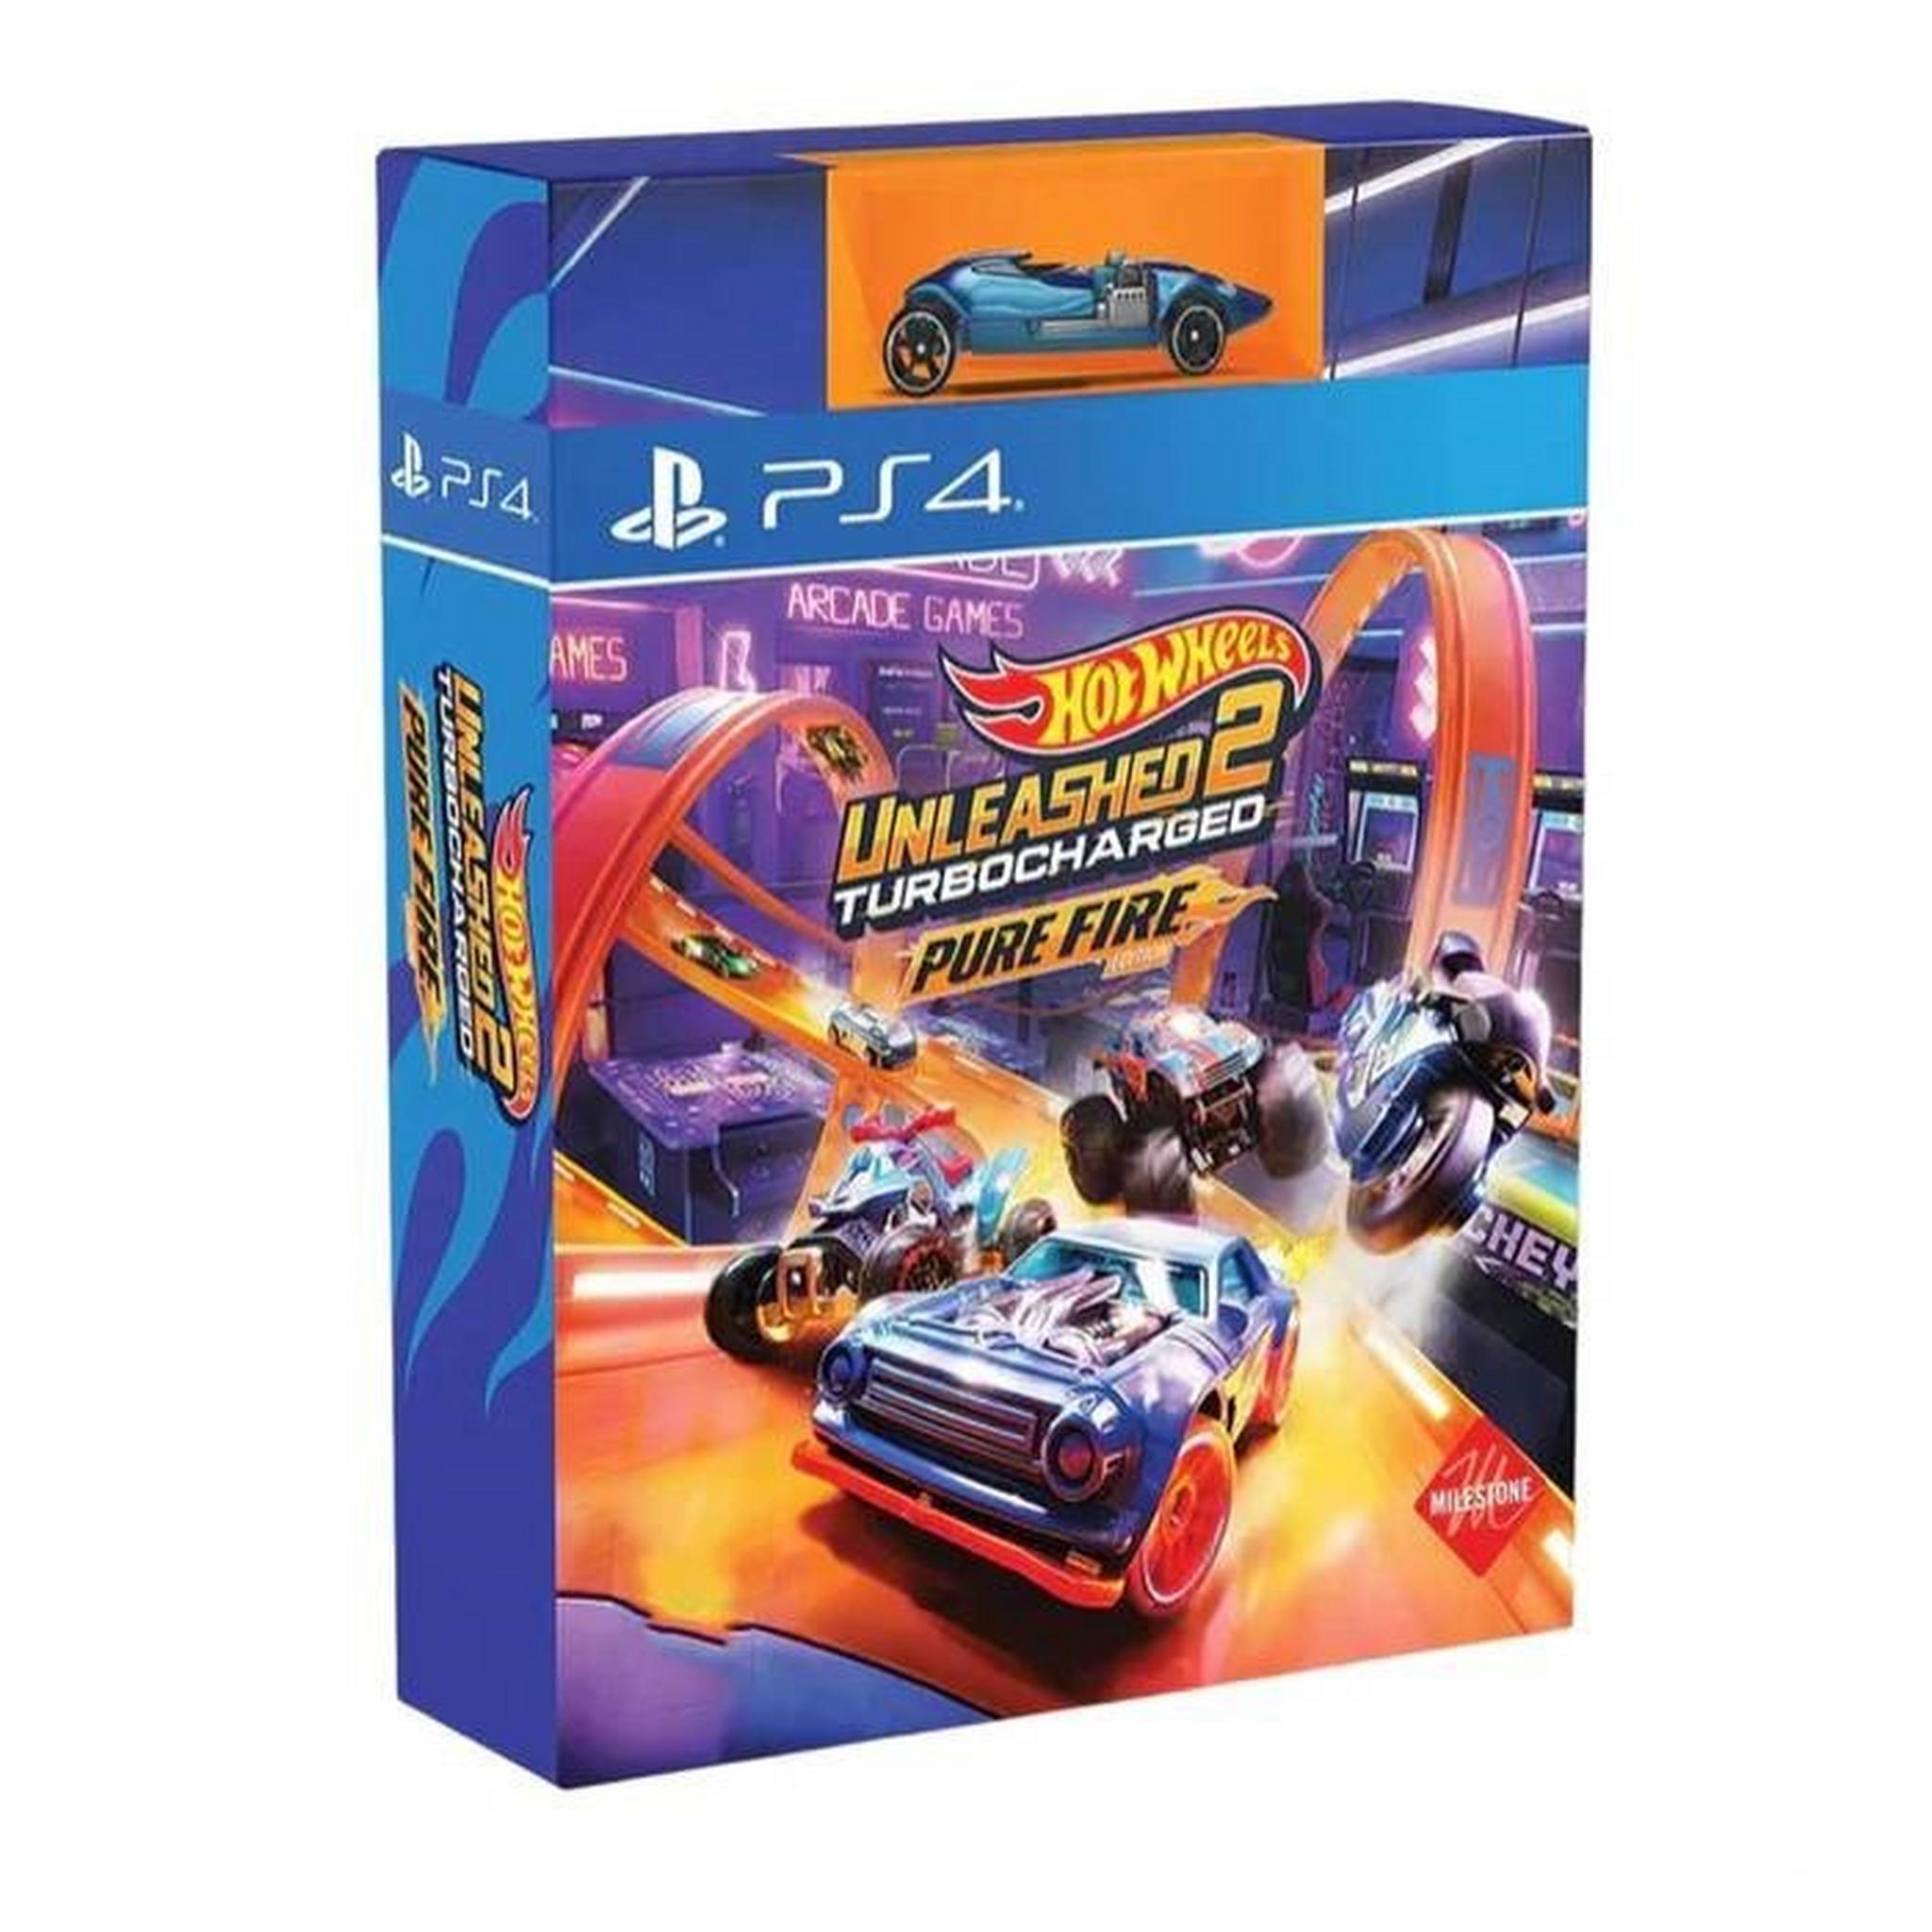 Hot Wheels Unleashed 2 – Turbocharged Pure Fire Edition PlayStation 4 Game